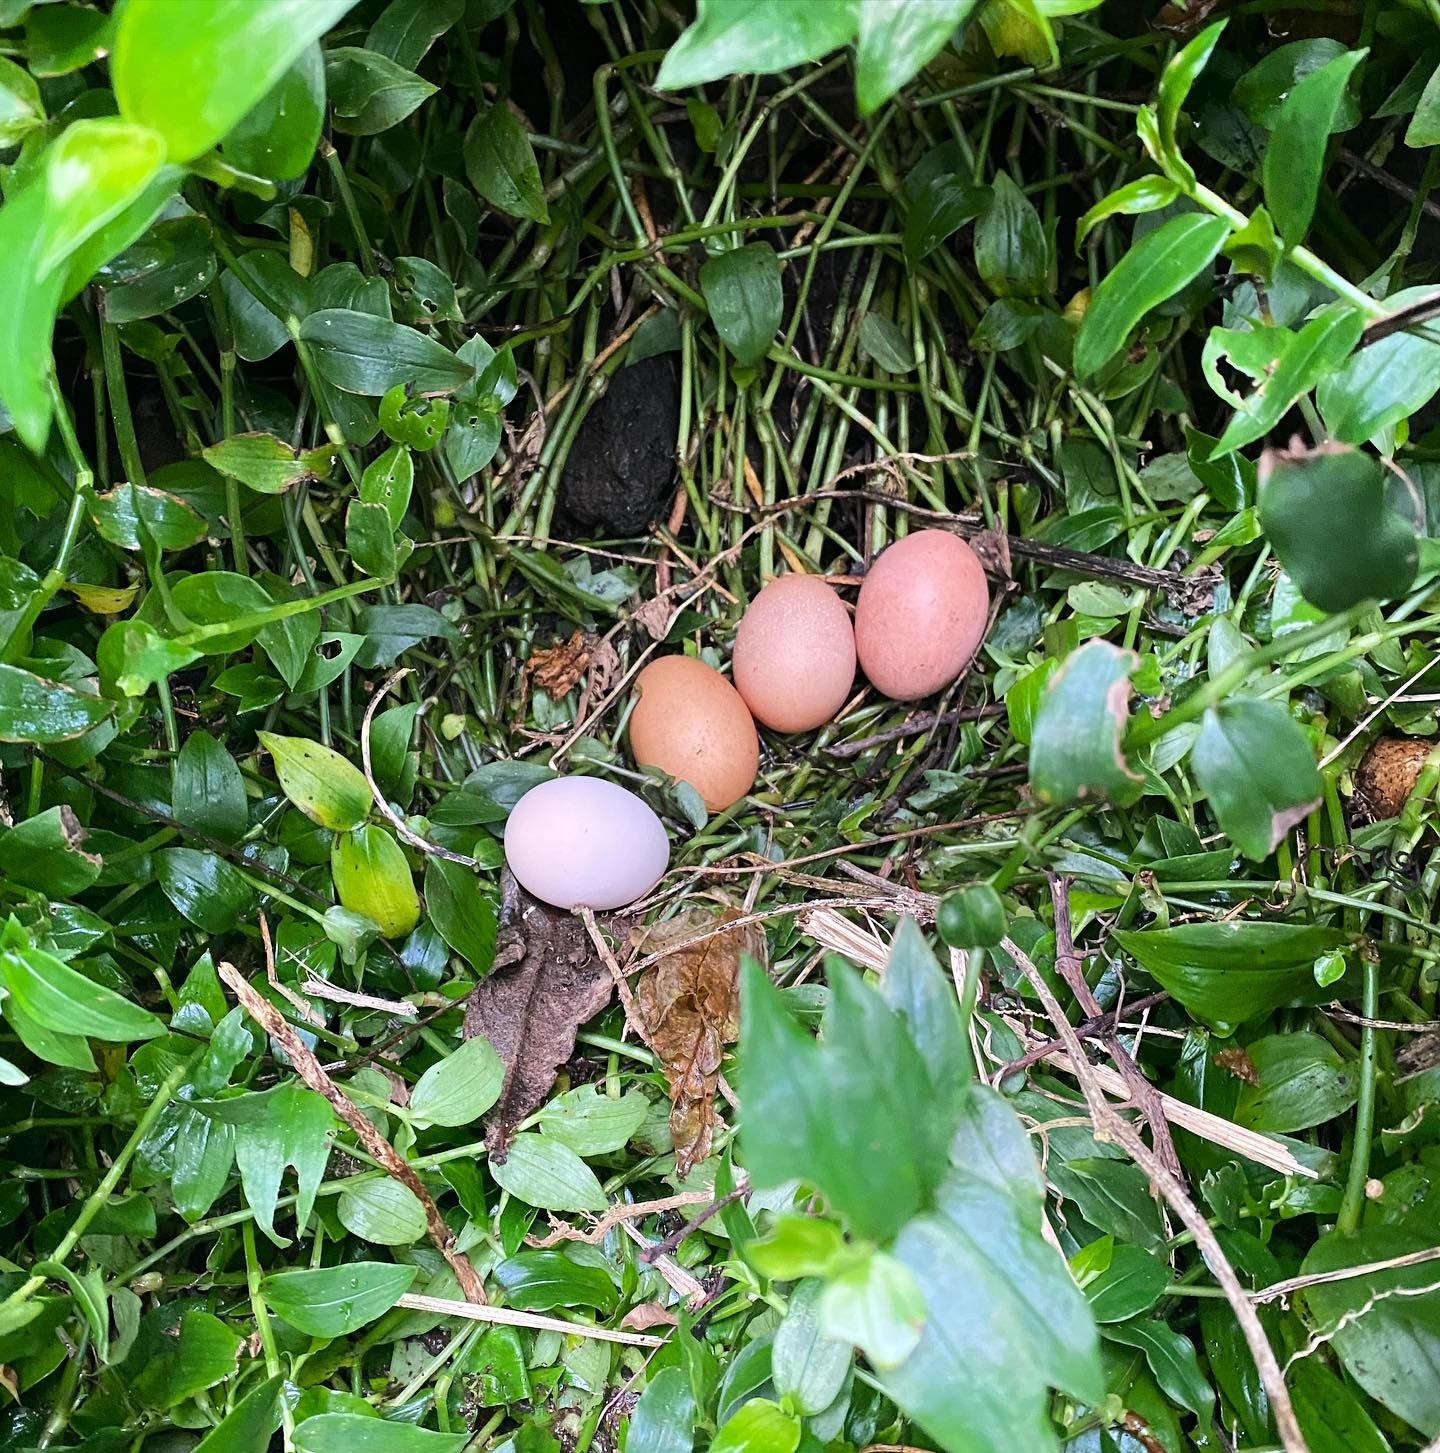 Found where the chickens have been hiding their eggs 🥚!!!